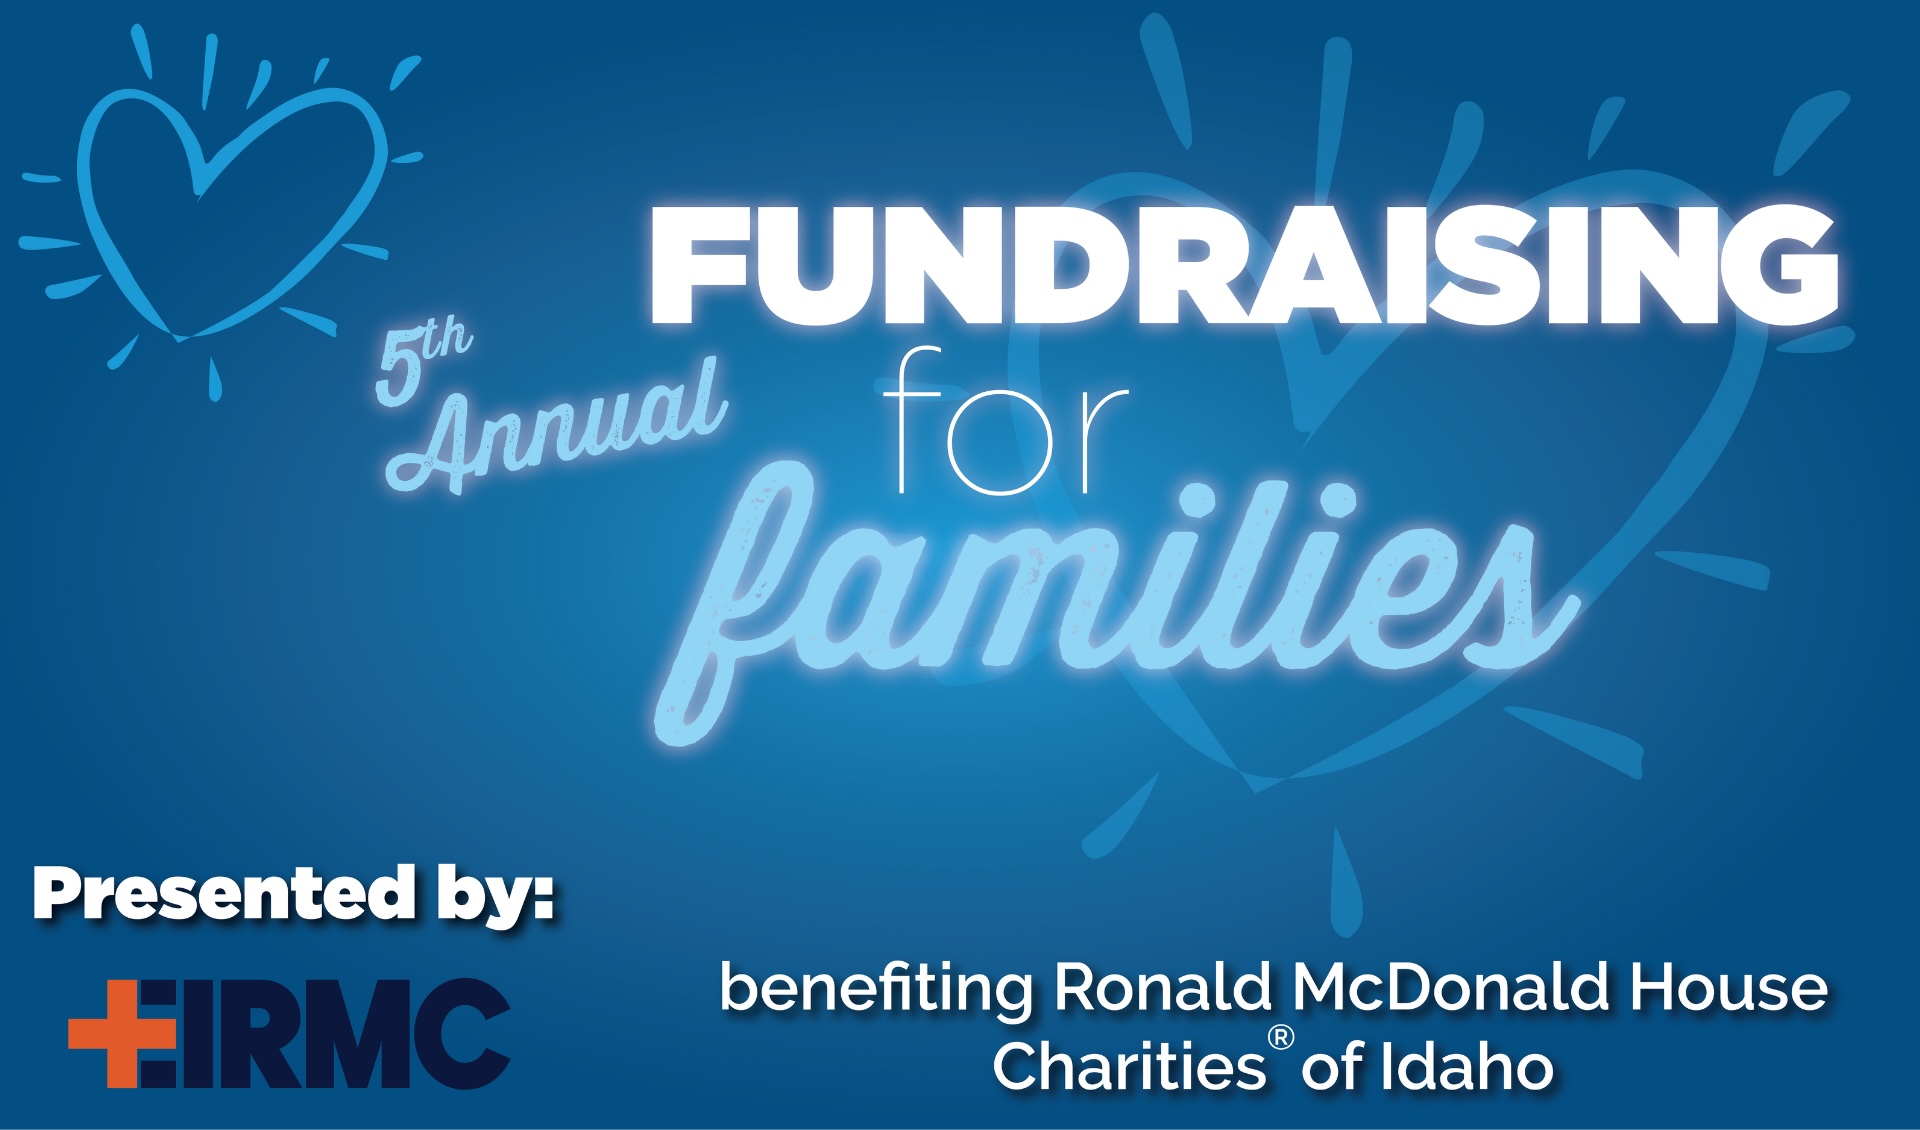 5th Annual Fundraising for Families Website Image